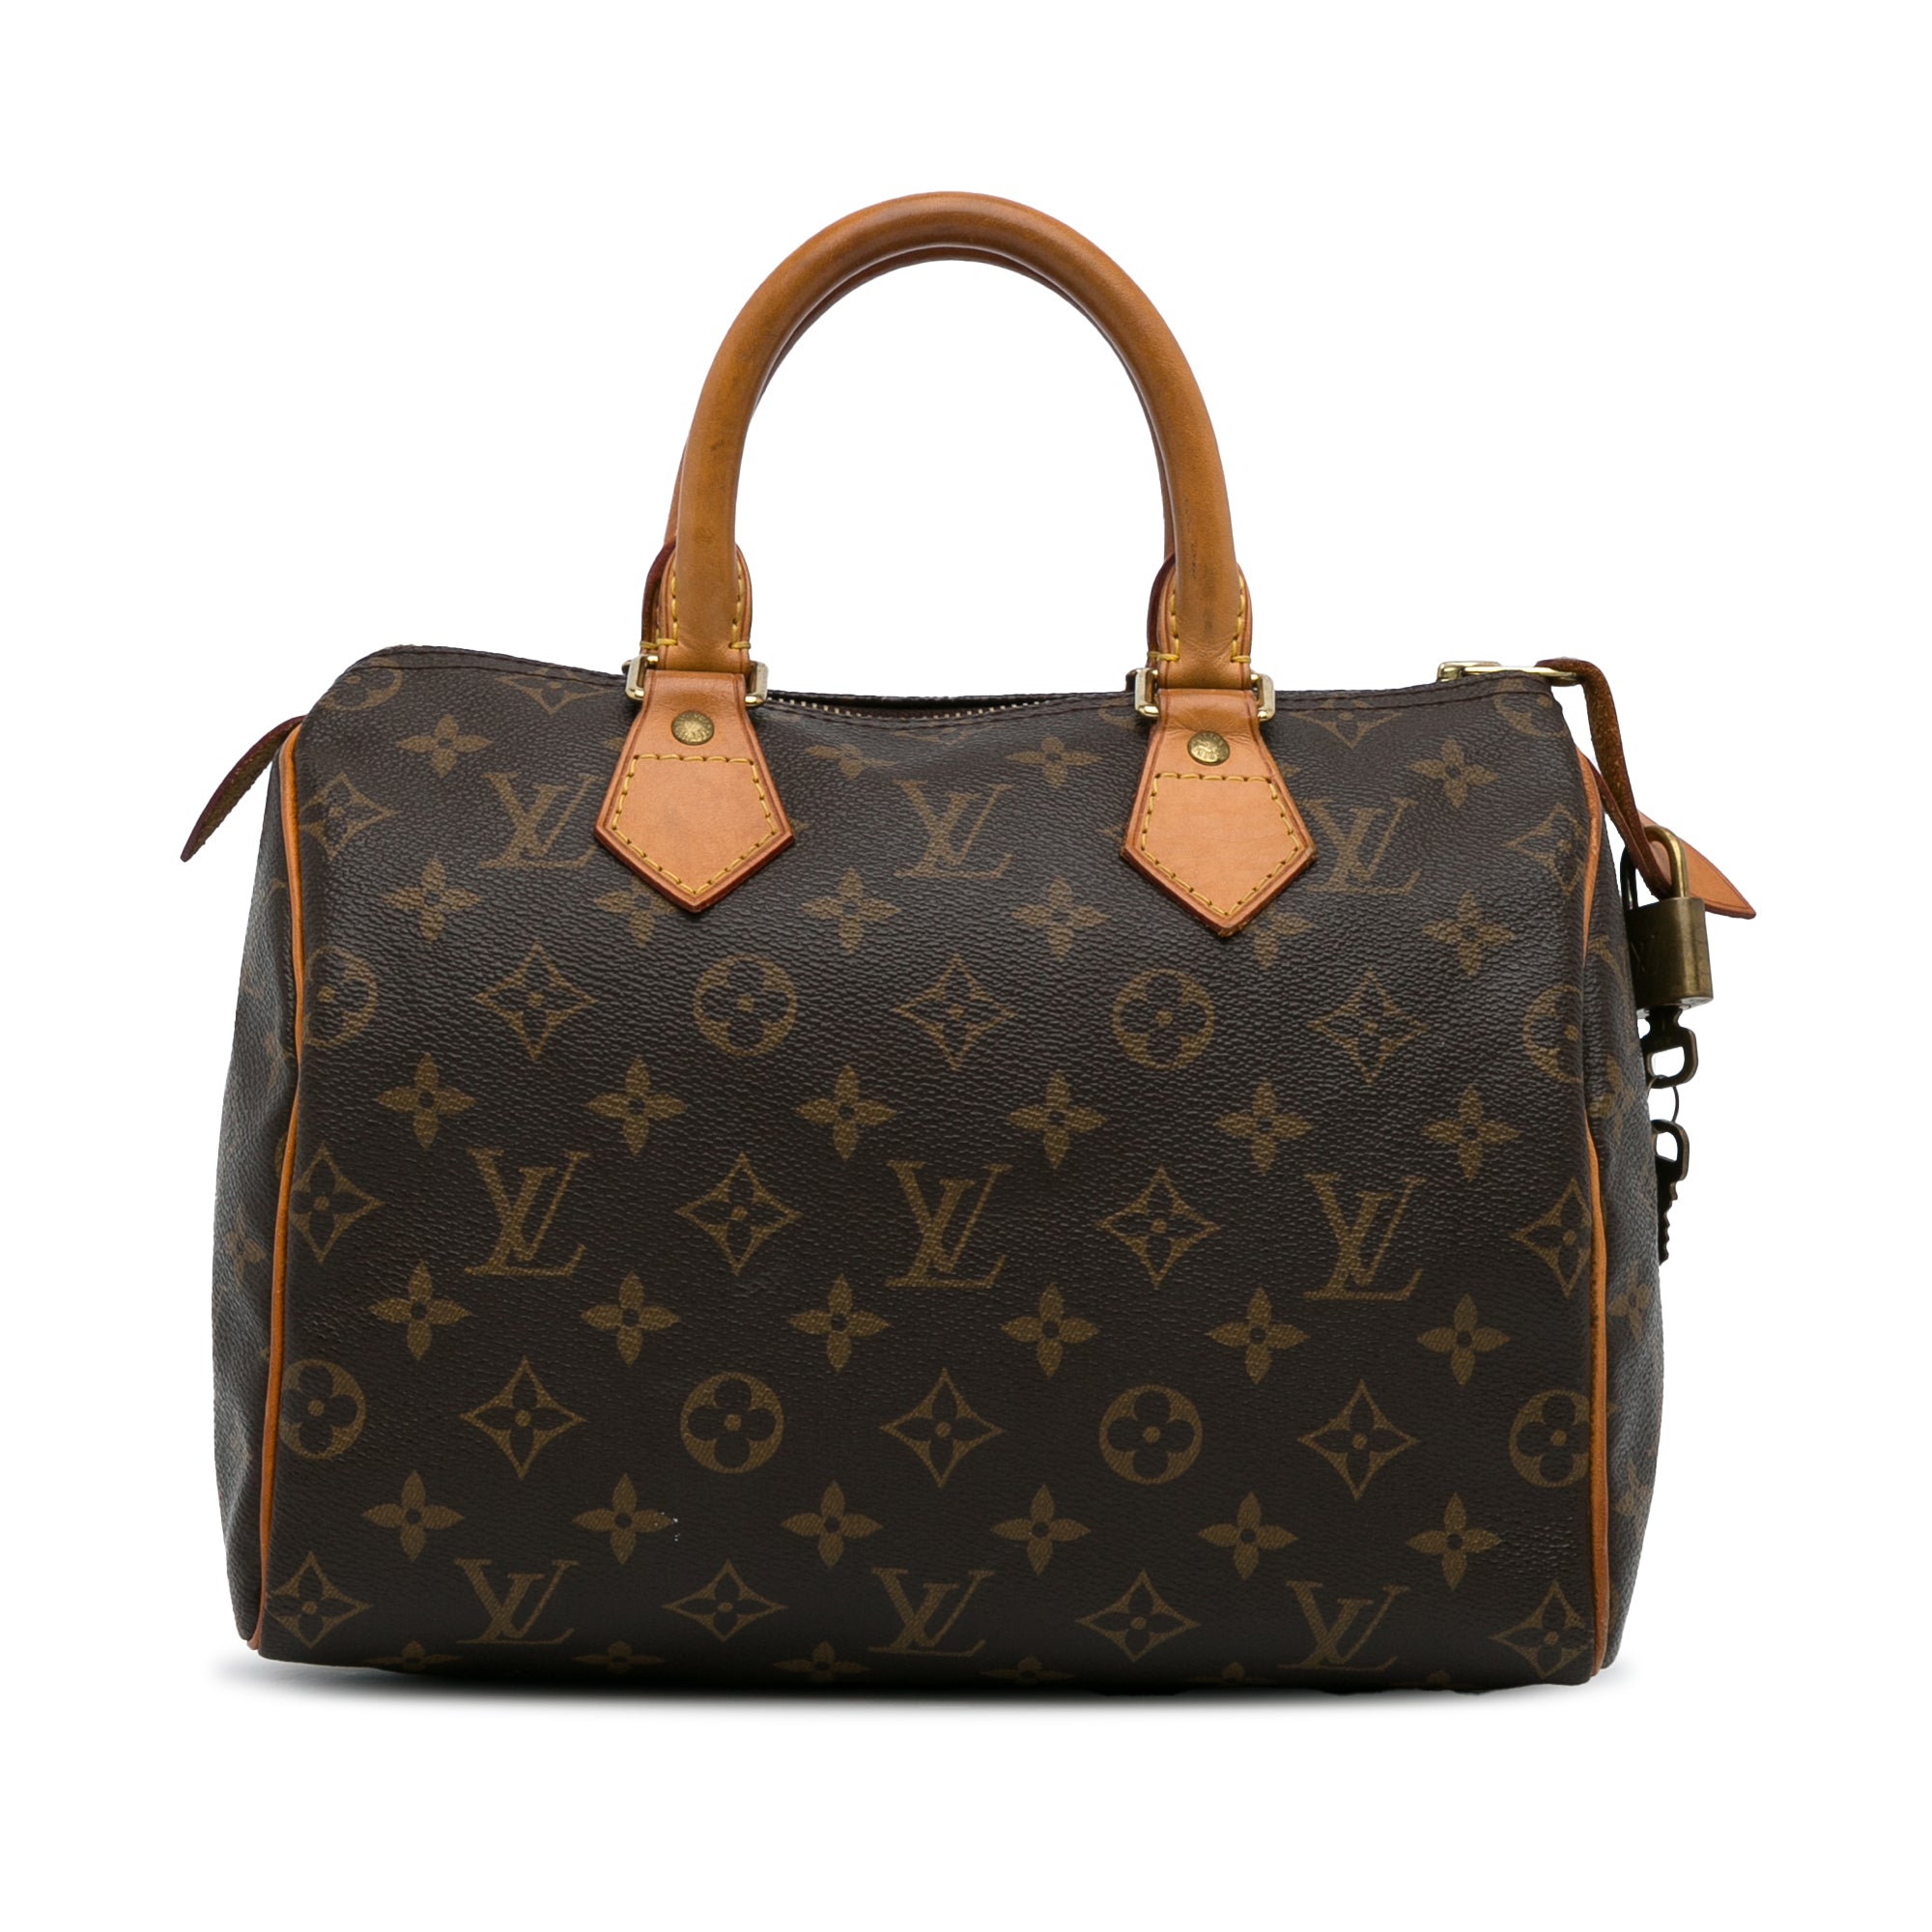 Pre-owned LOUIS VUITTON Surya Mahina Black Leather Shoulder Tote